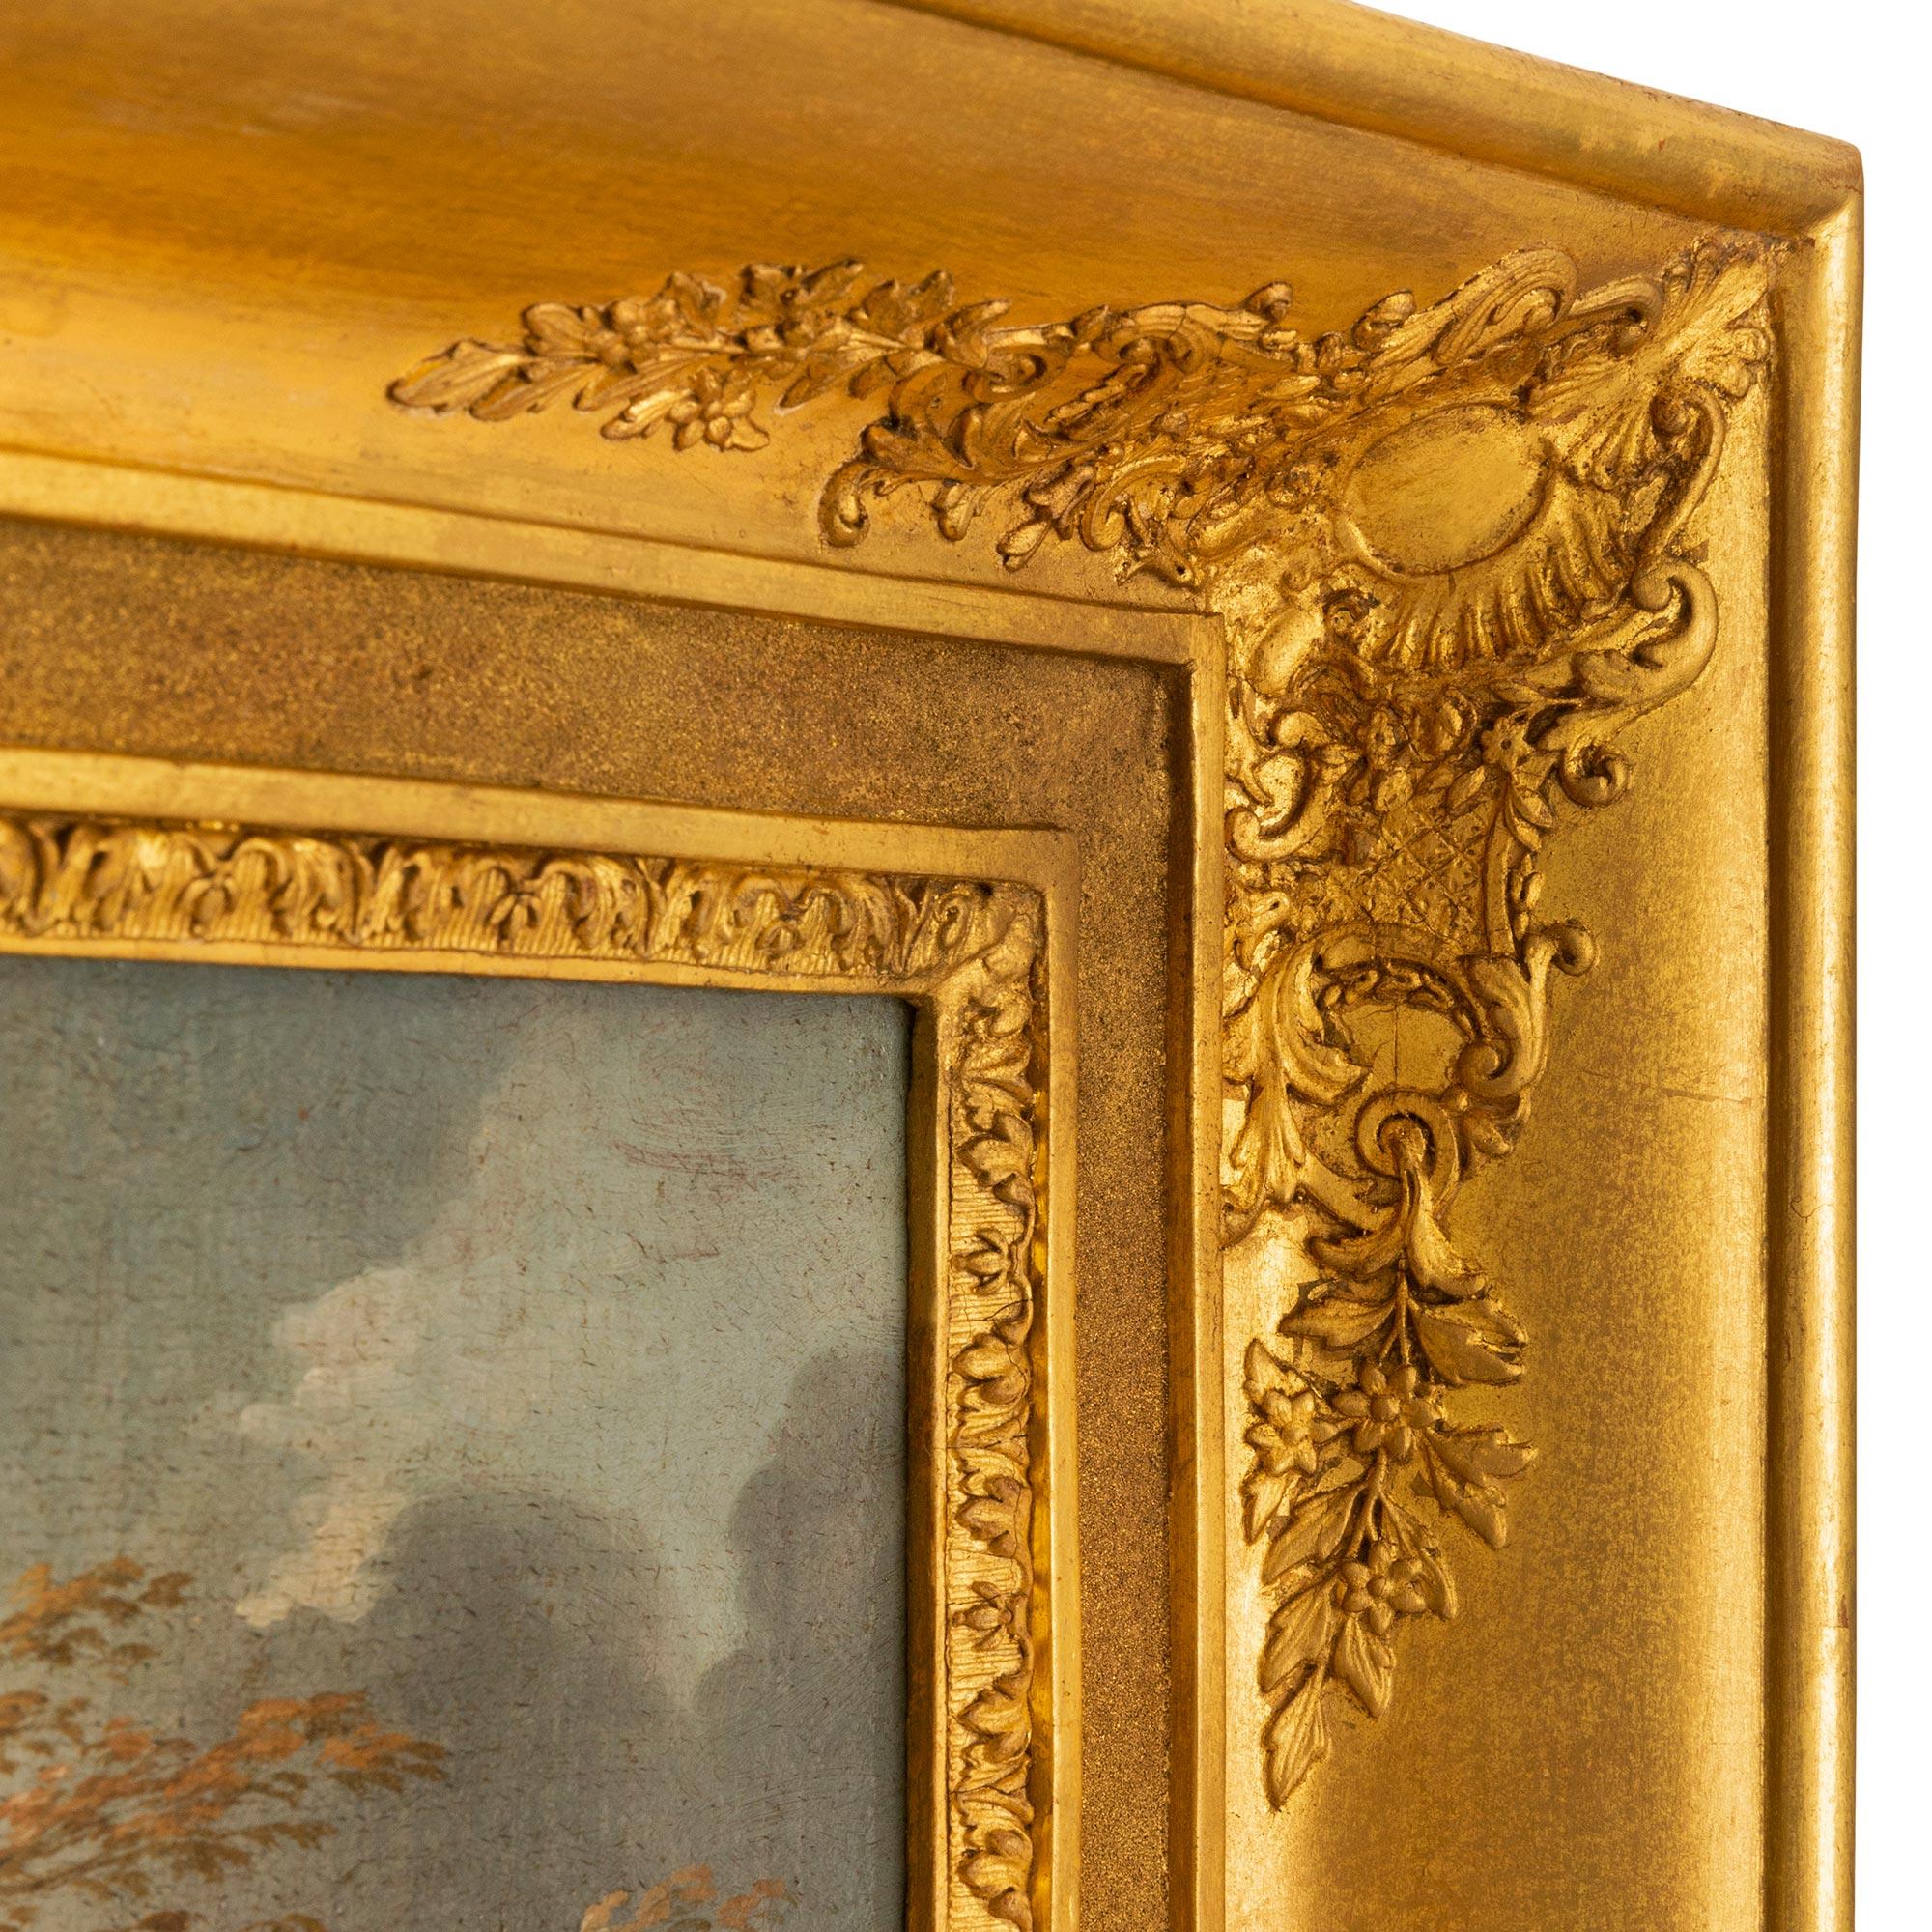 Continental 18th Century Oil on Canvas Painting in Its Original Giltwood Frame In Good Condition For Sale In West Palm Beach, FL